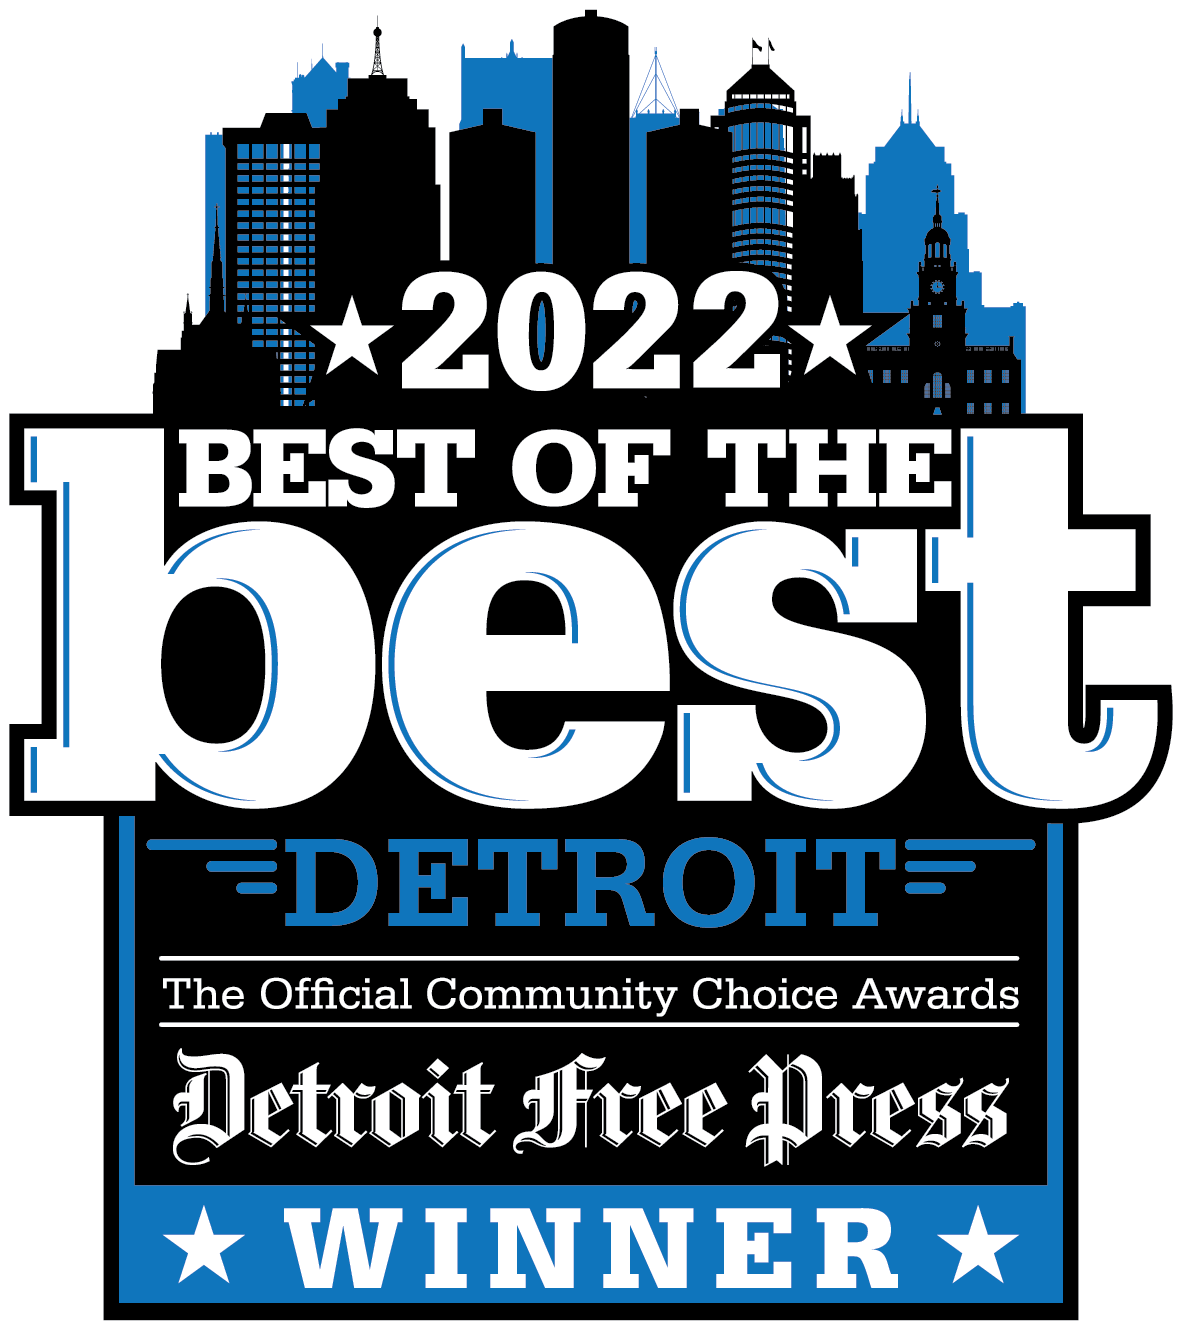 Logo with "2022 Best of the Best Detroit" and "The Official Community Choice Awards Detroit Free Press Winner" text, featuring a silhouette of Detroit's skyline, encapsulates the city's prestigious awards.